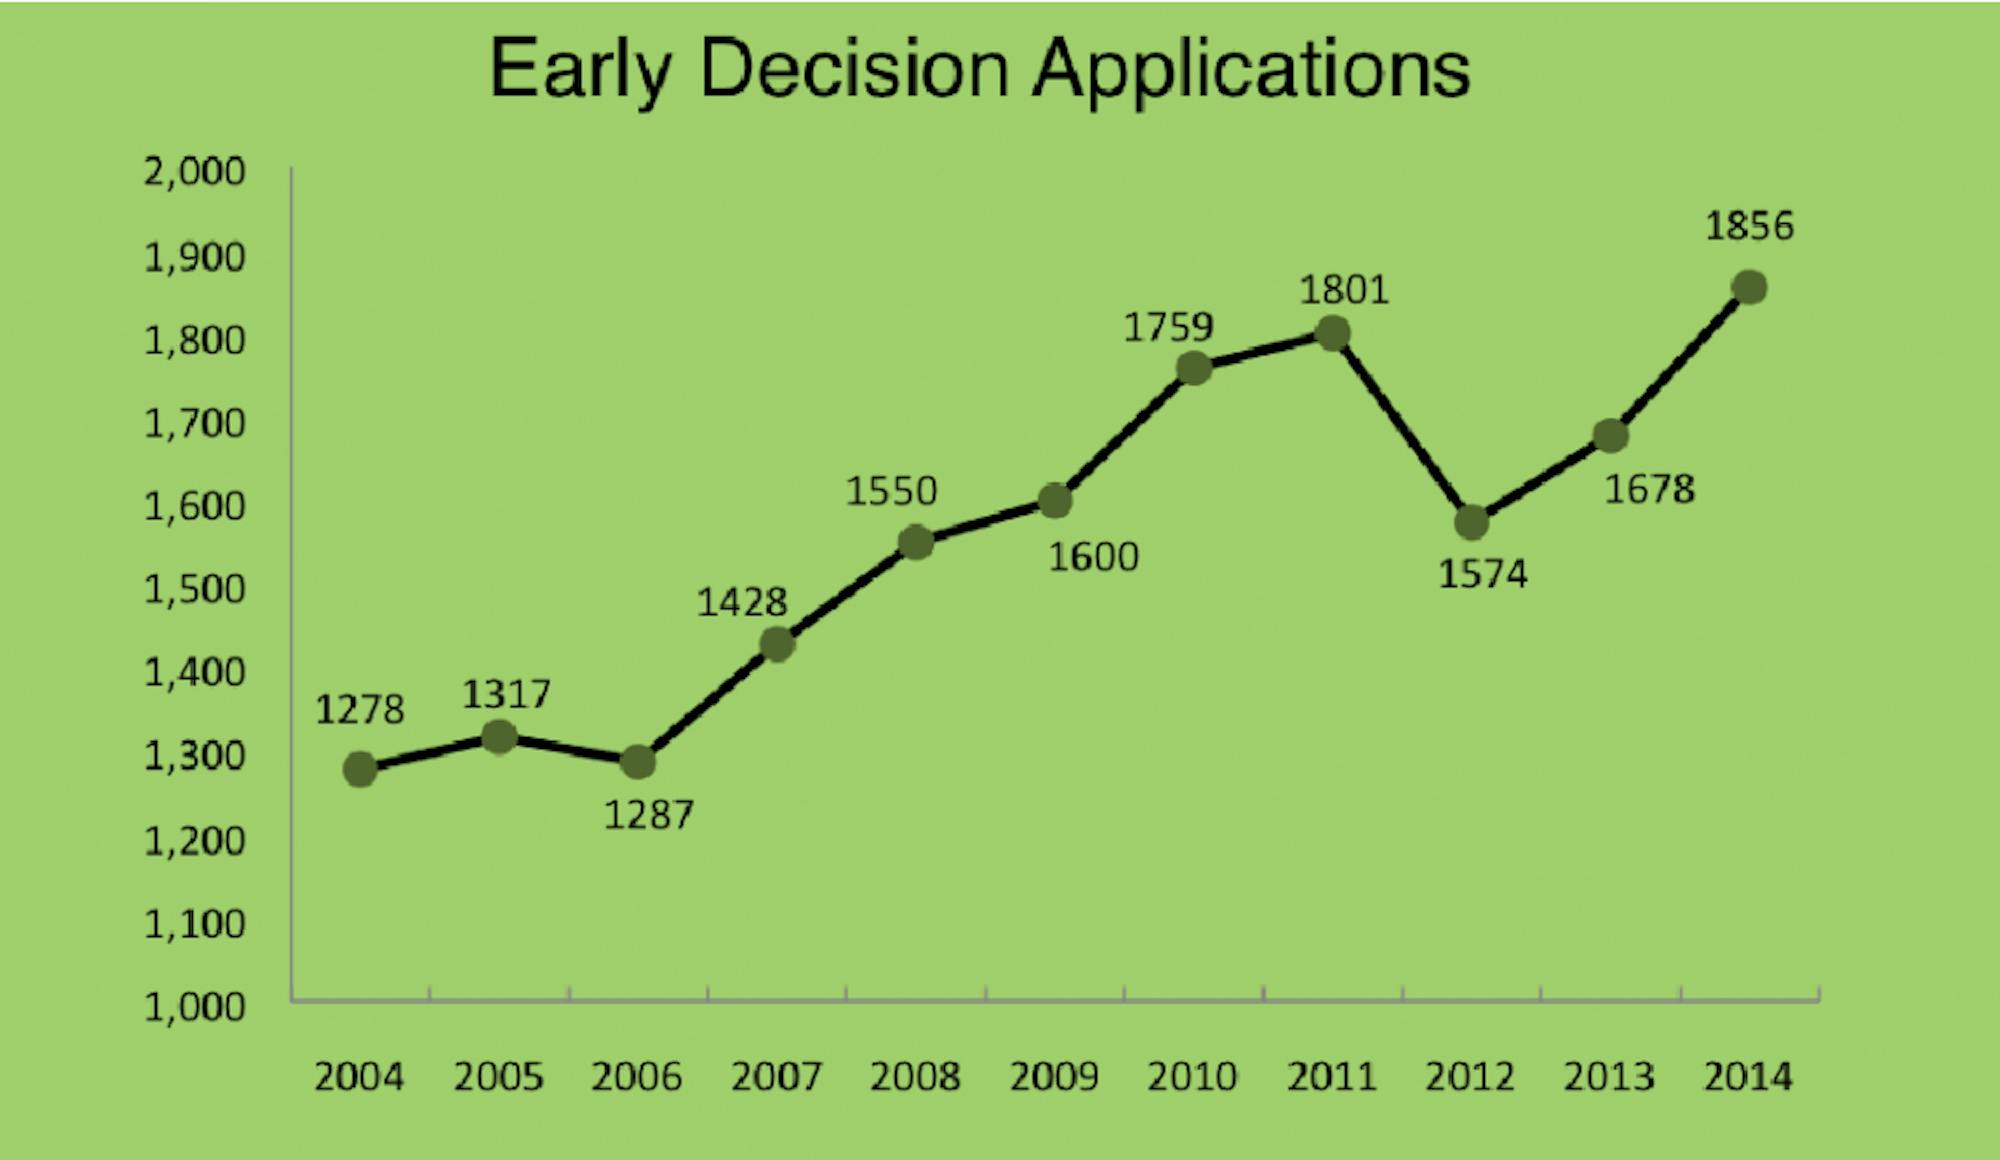 This year’s number of early applications reached a record high.